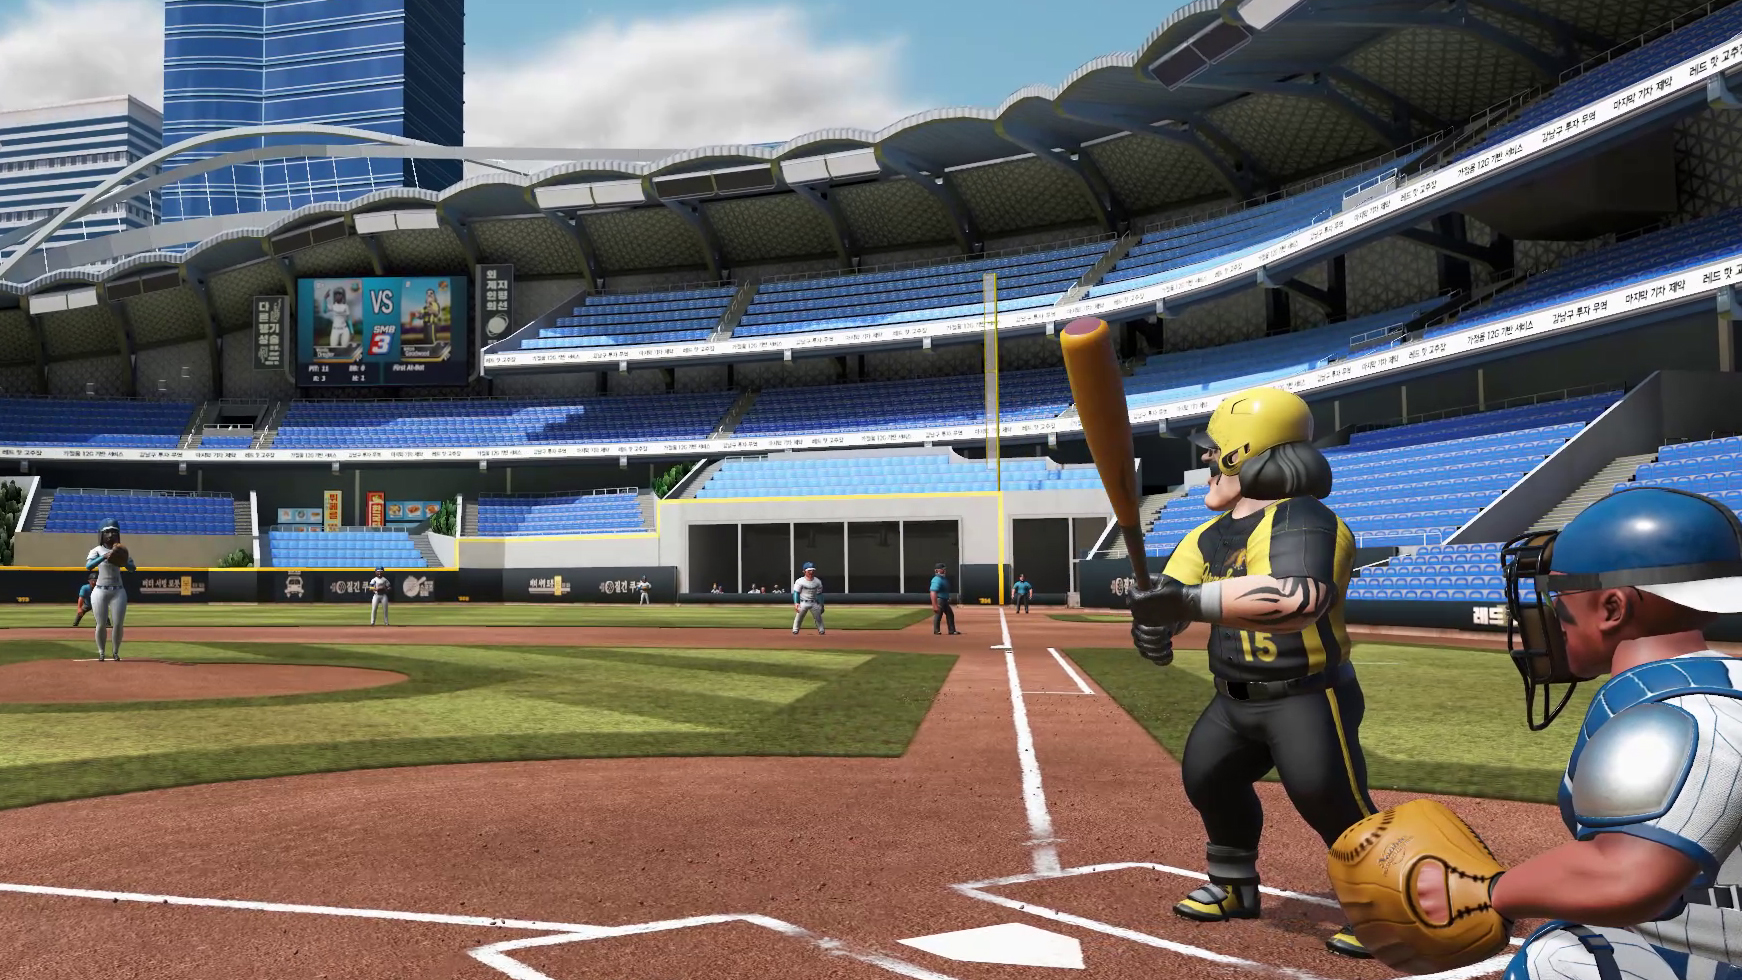  Playing Super Mega Baseball 3 with no crowds in the stands is incredibly eerie 